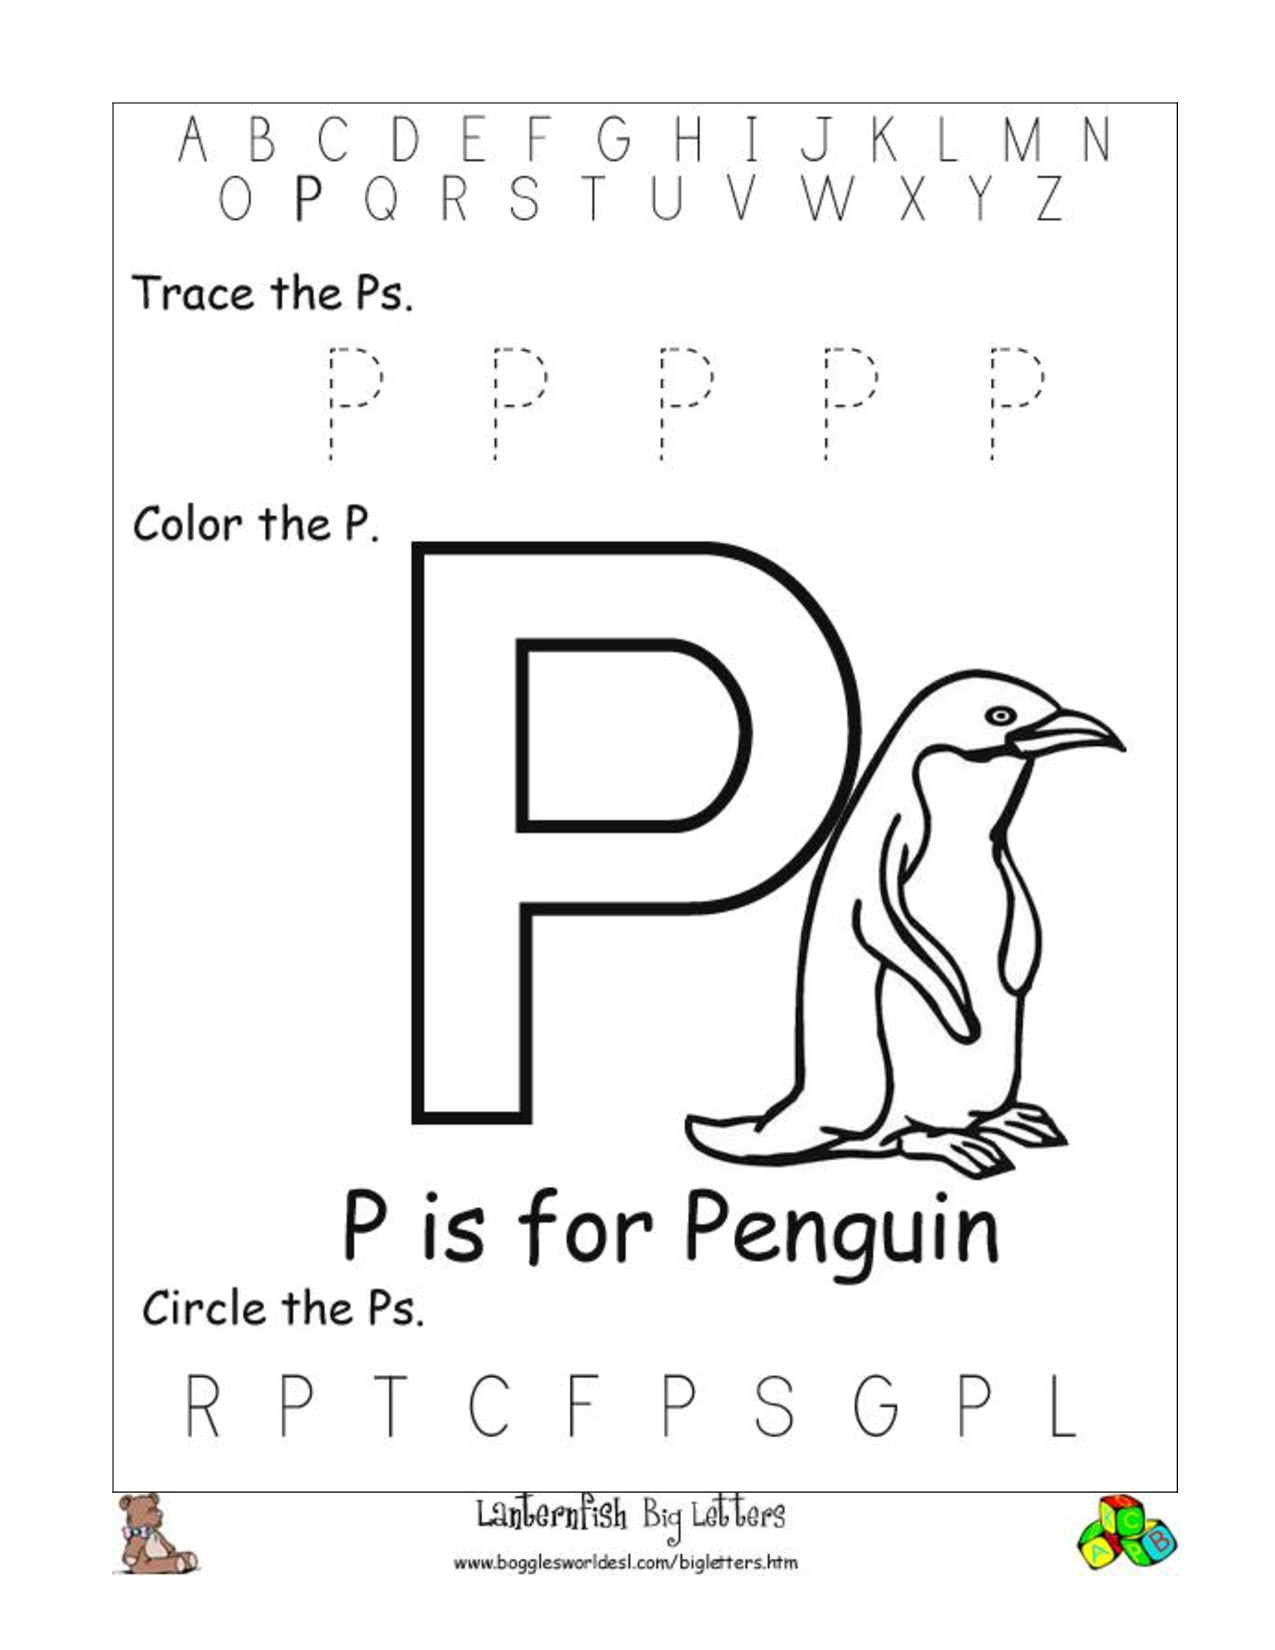 4 Best Images Of Letter P Printables Printable Letter P Worksheets Preschool Printable Letter 